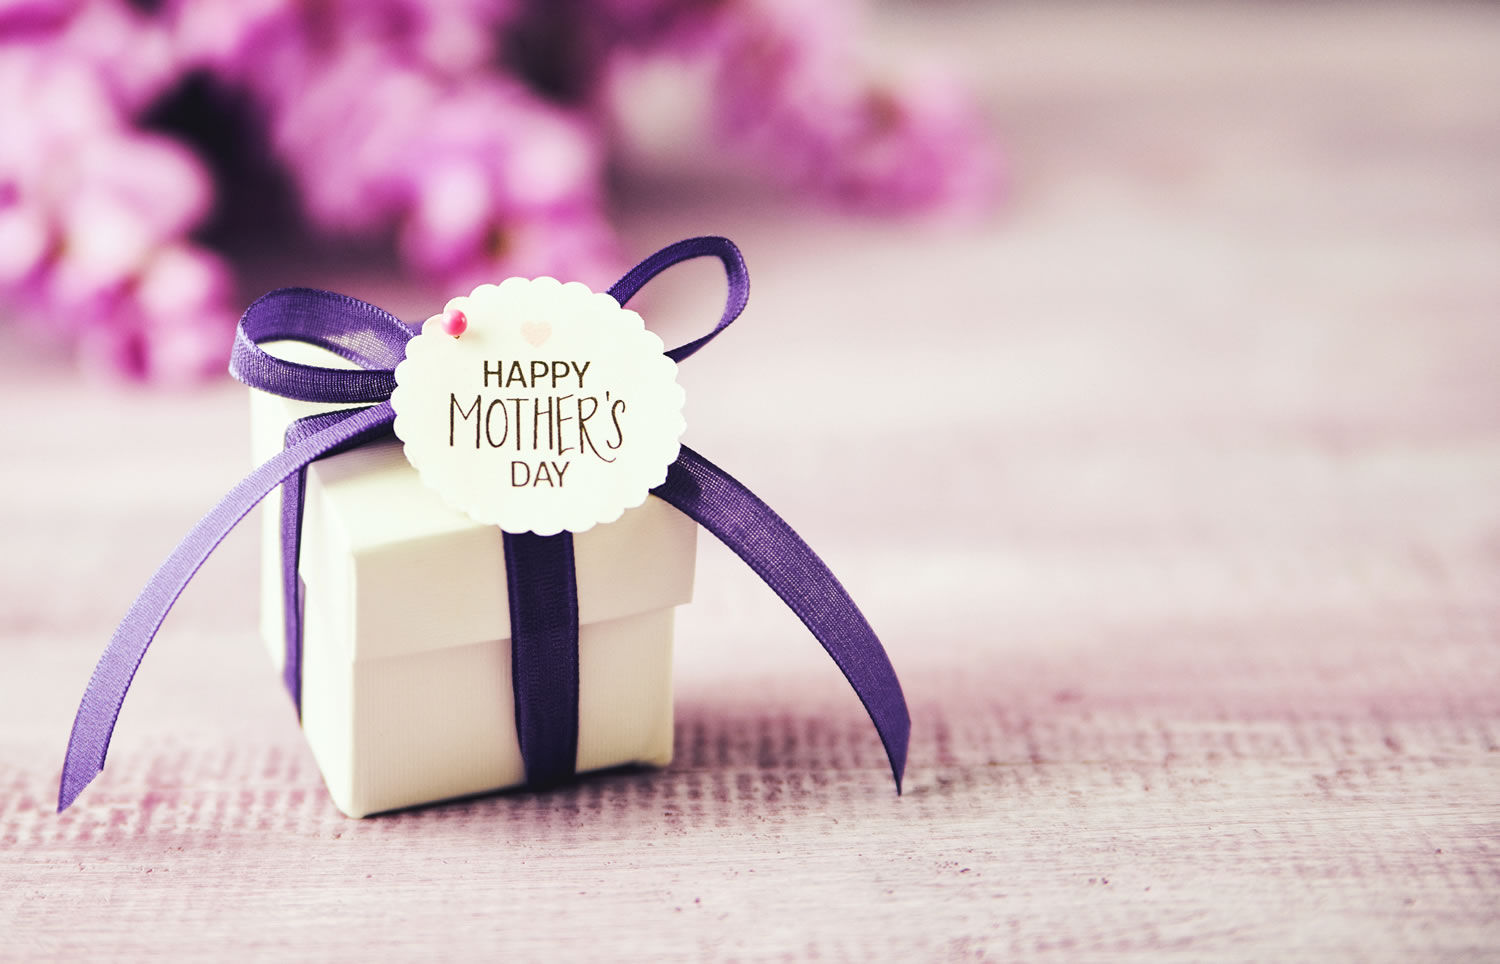 7 Personalized gift ideas for Mother's Day - Airtasker Blog